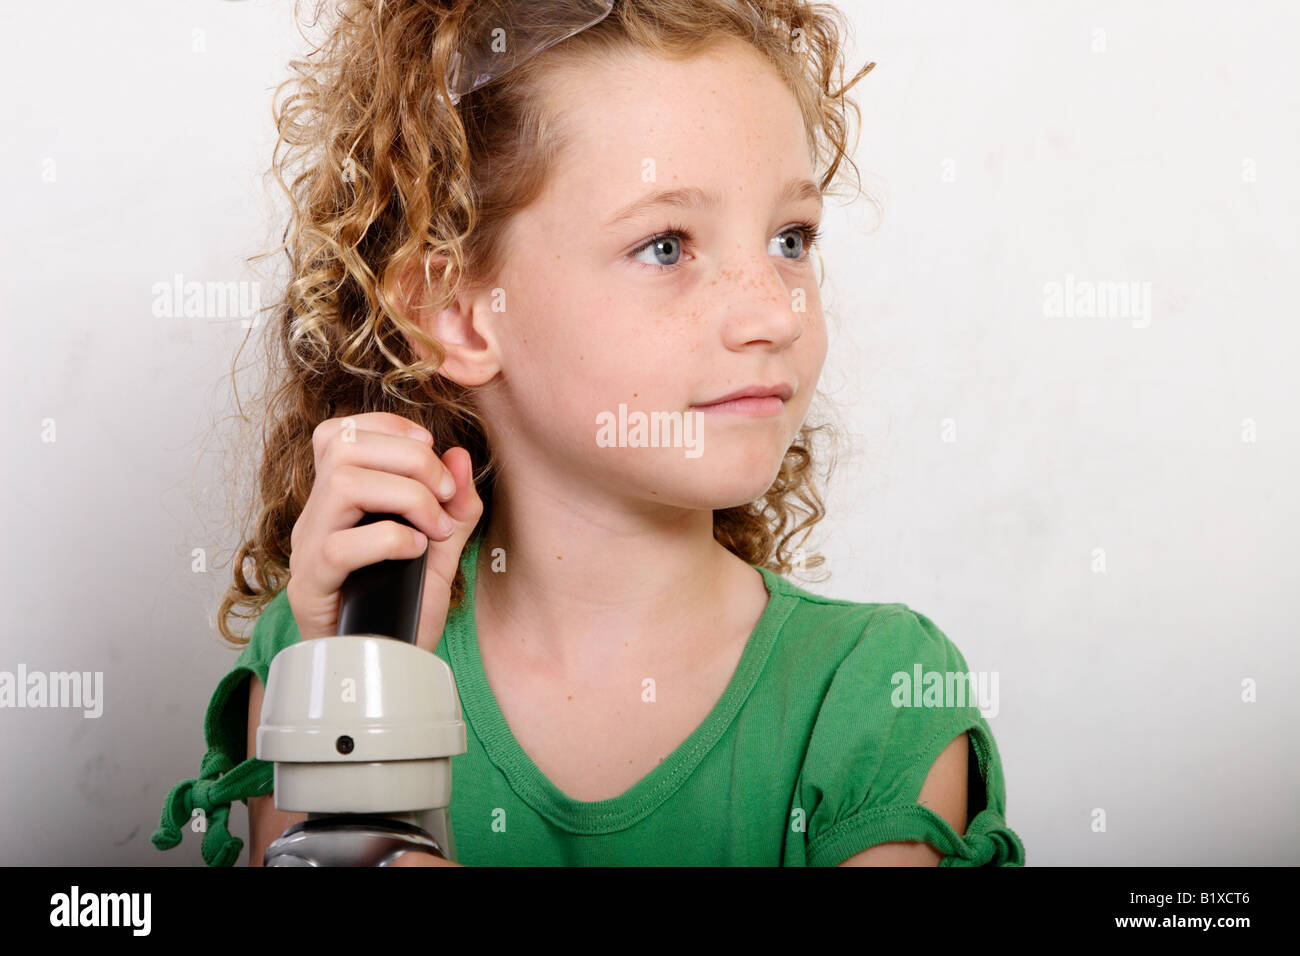 Stock Photograph of a student using a microscope Stock Photo